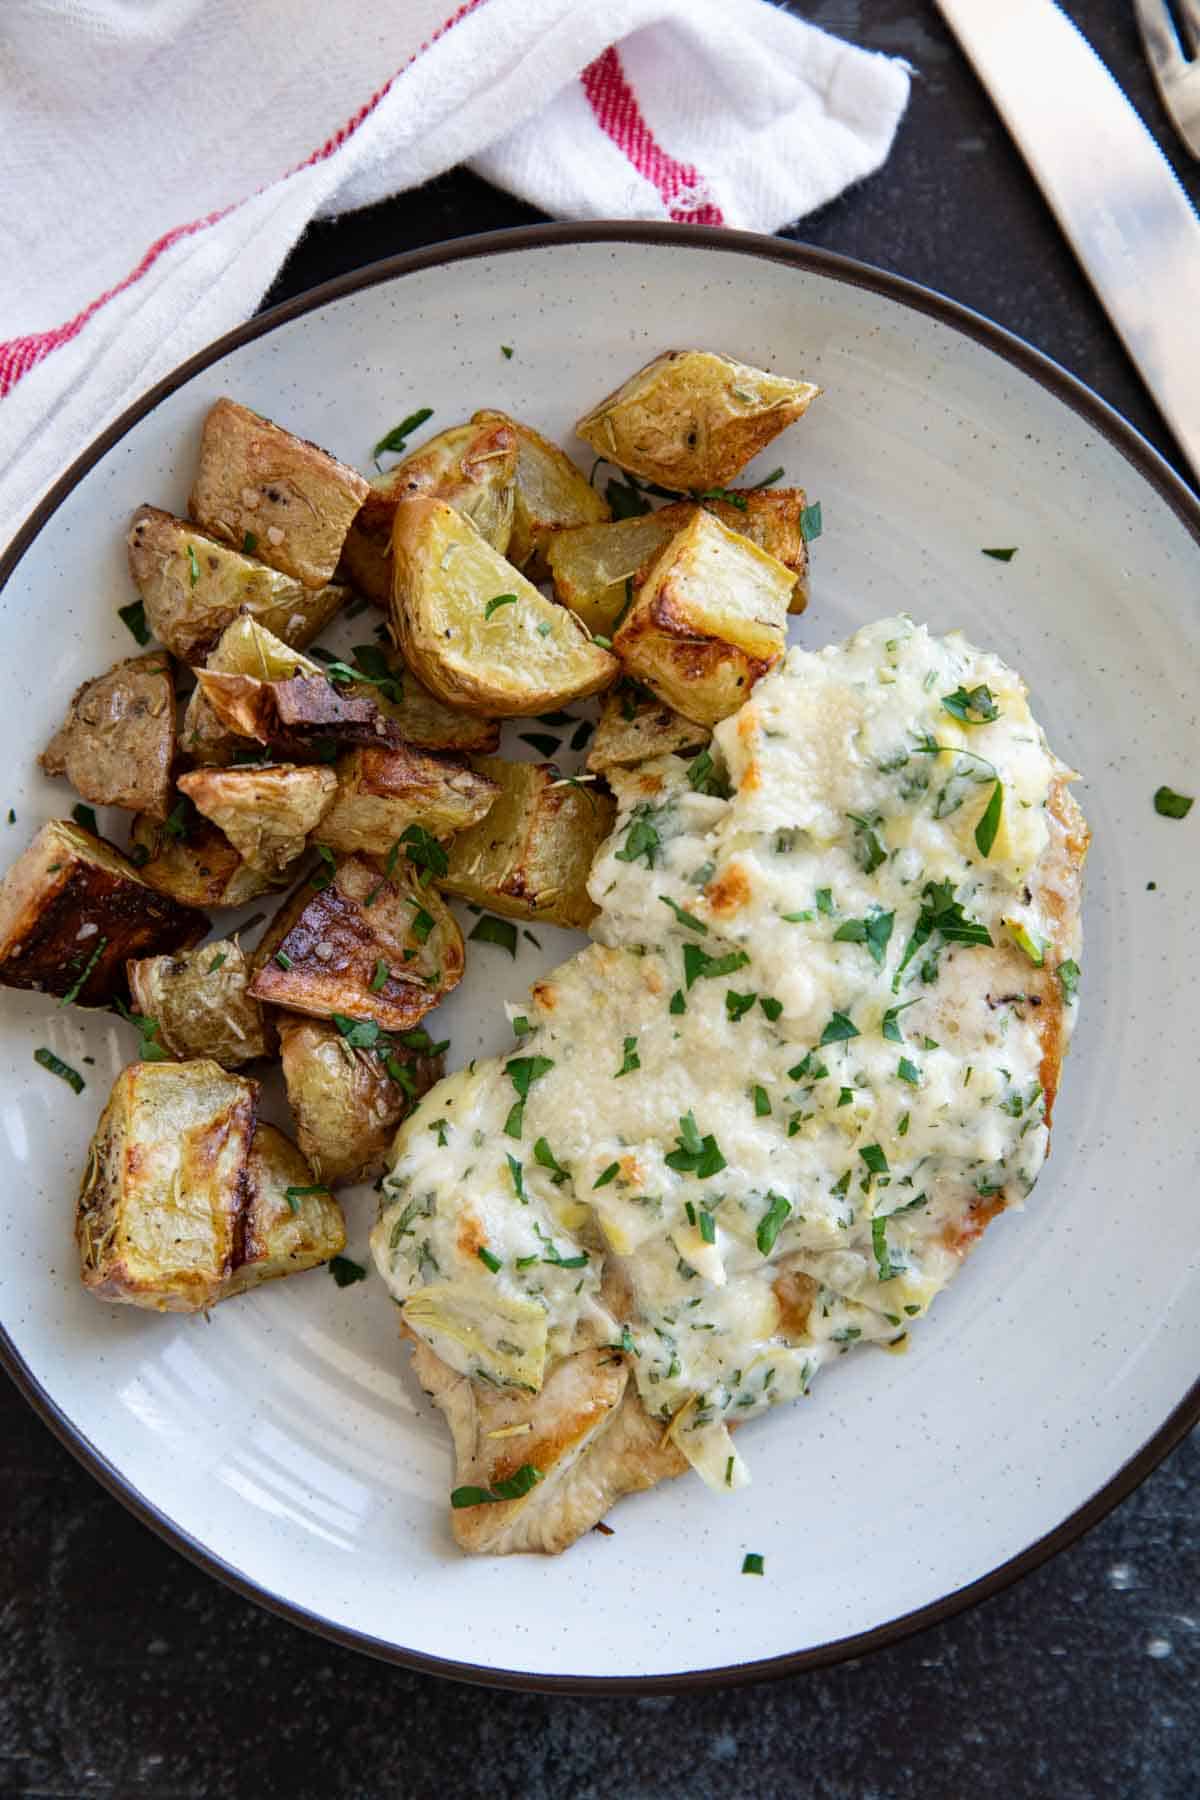 Chicken breast topped with creamy artichoke topping and served with roasted potatoes.